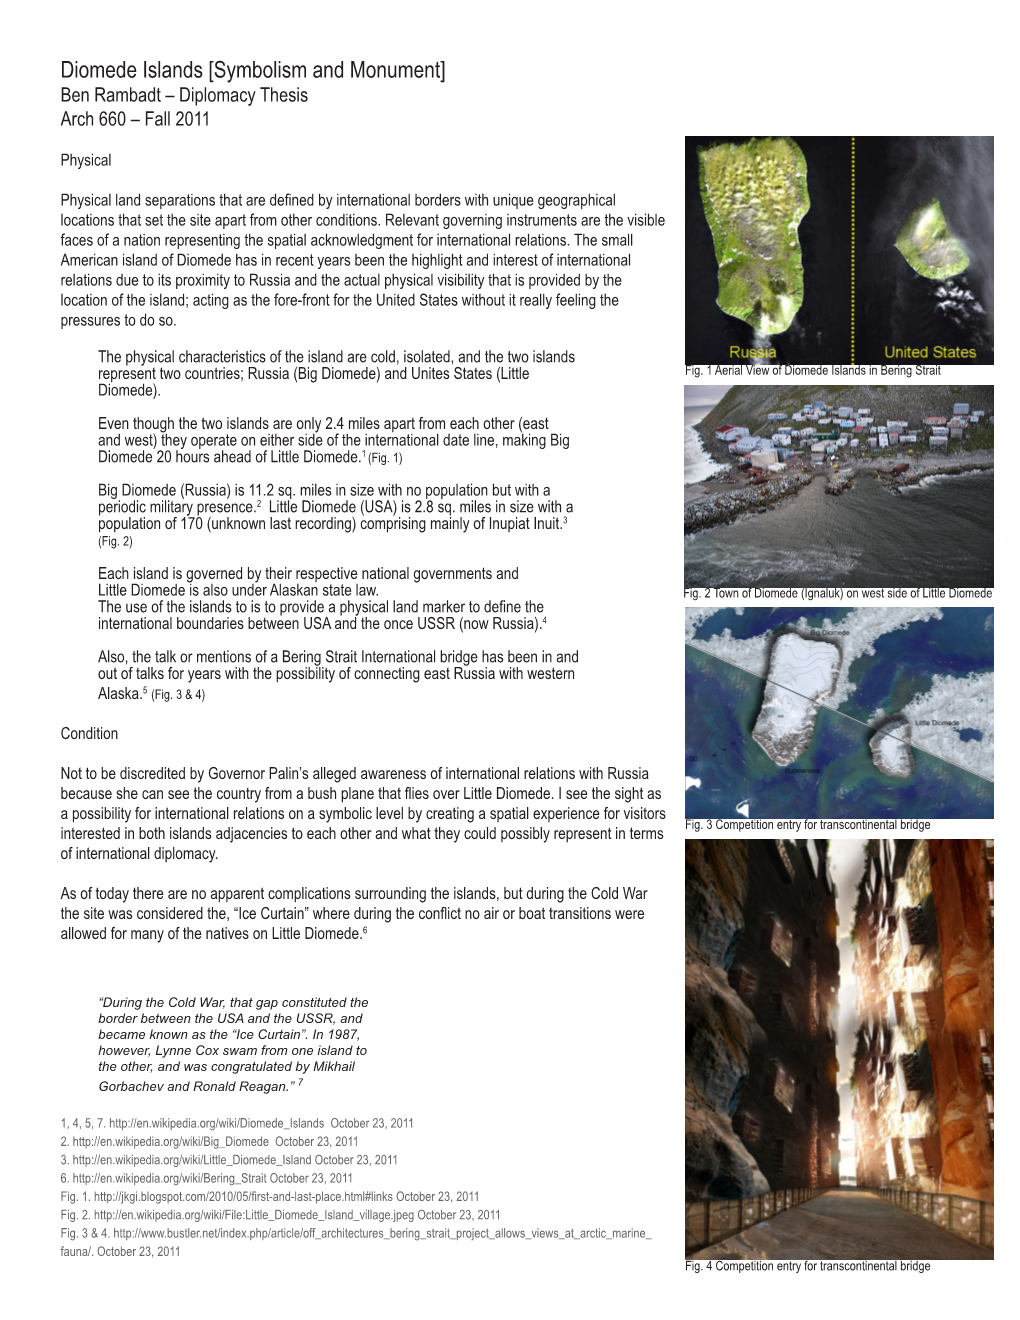 Diomede Islands [Symbolism and Monument] Ben Rambadt – Diplomacy Thesis Arch 660 – Fall 2011